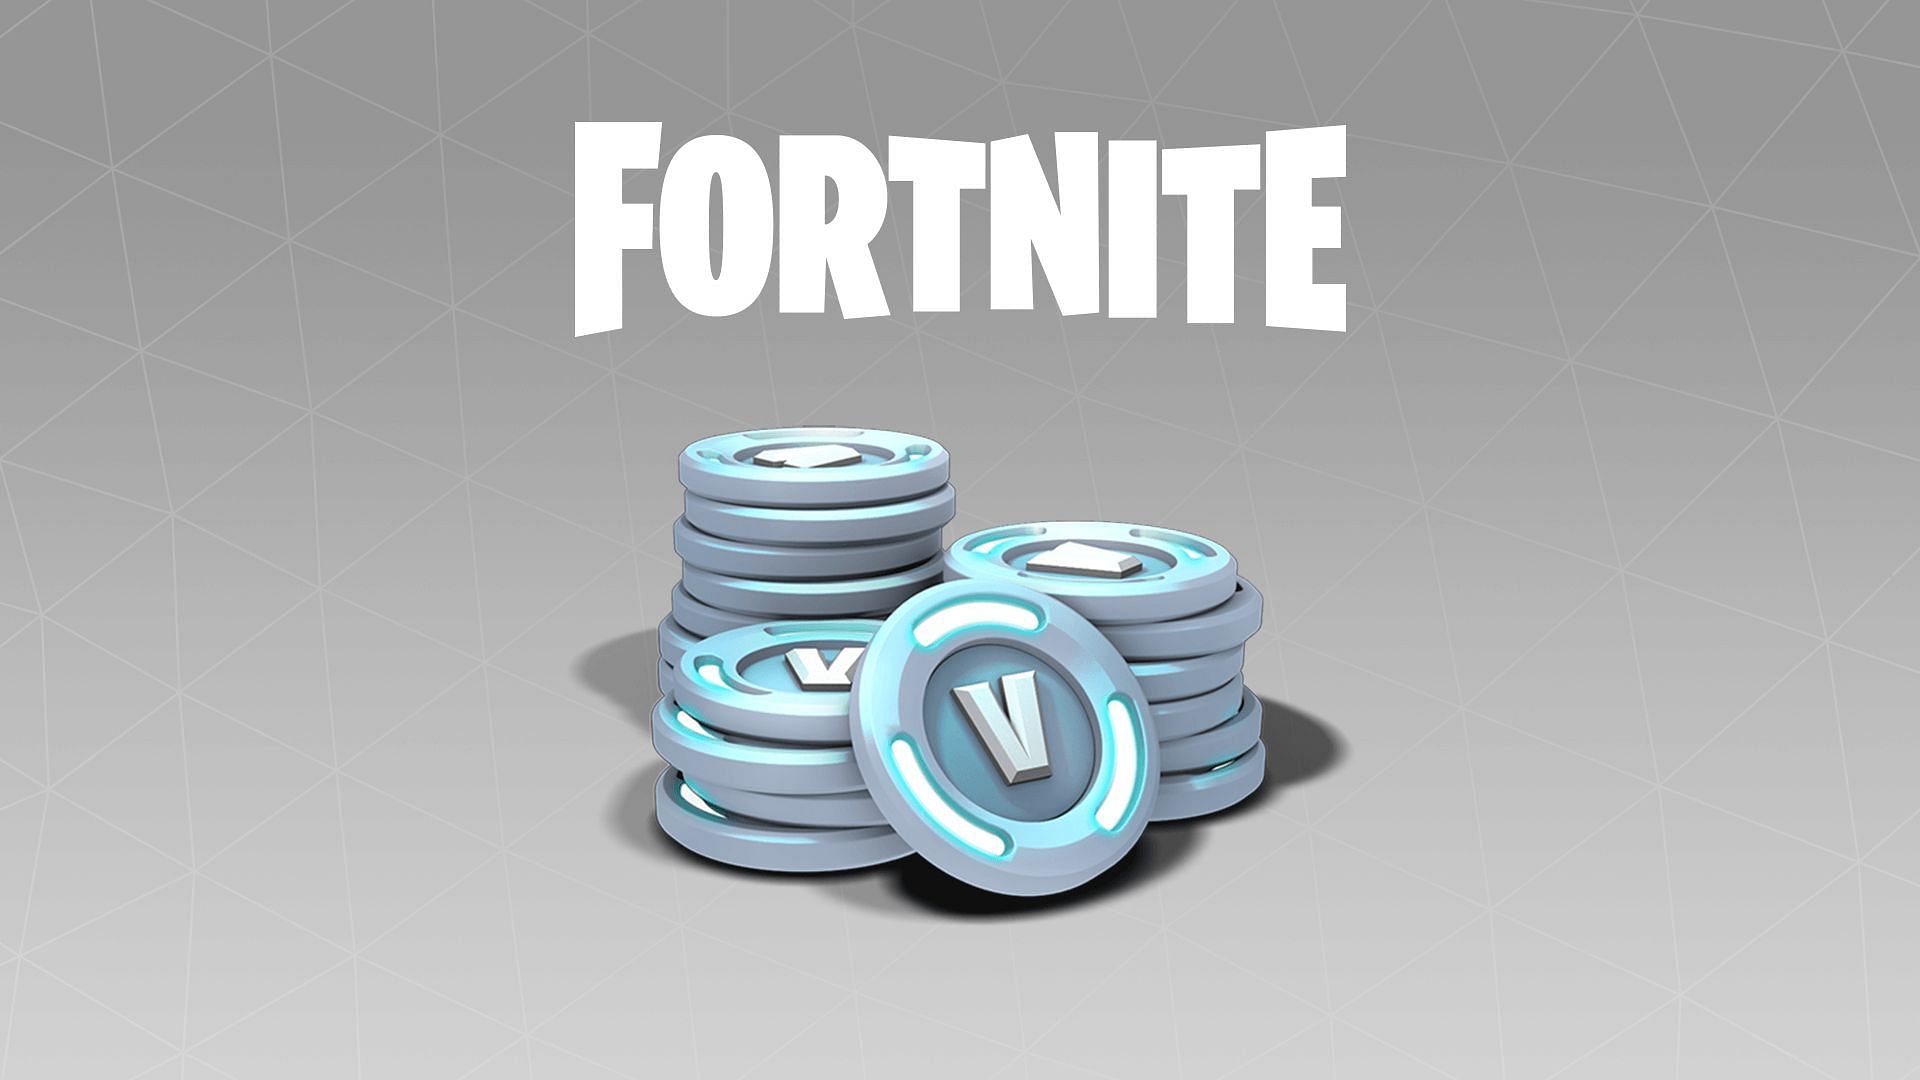 Fortnite community unhappy with V-Bucks gatekeeping on Battle Pass, demands changes